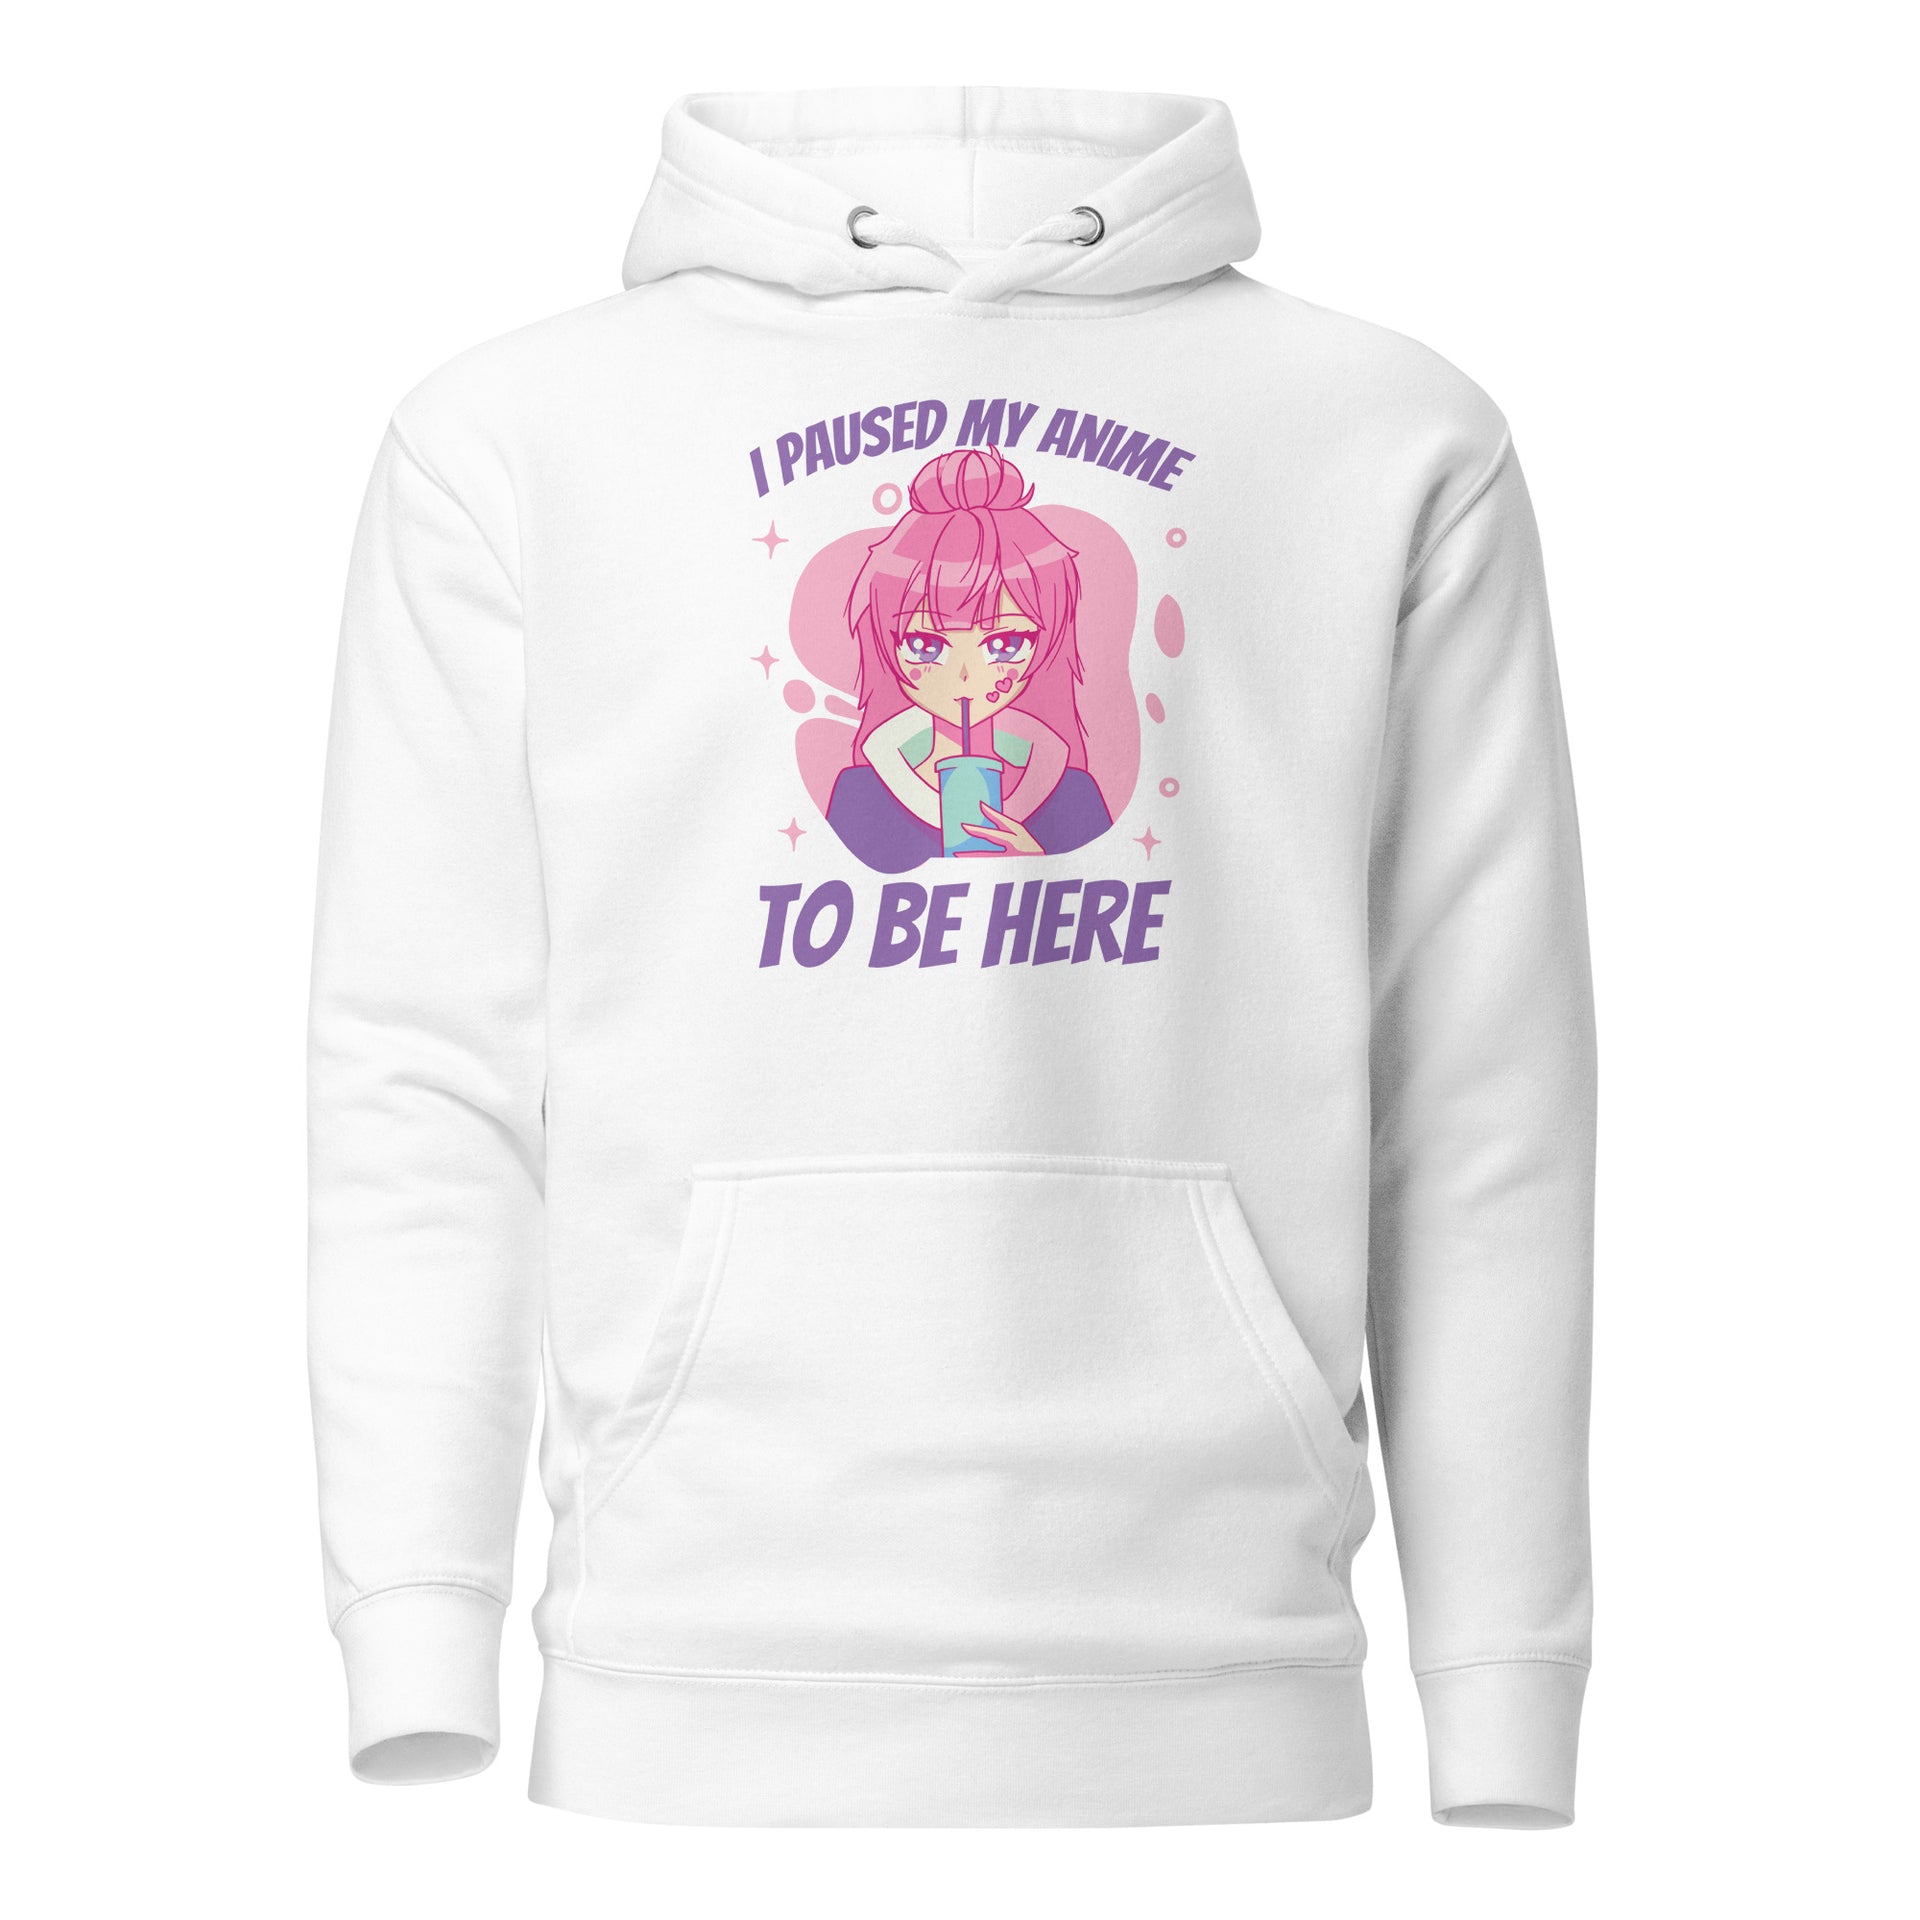 I Paused My Anime To Be Here Unisex Hoodie